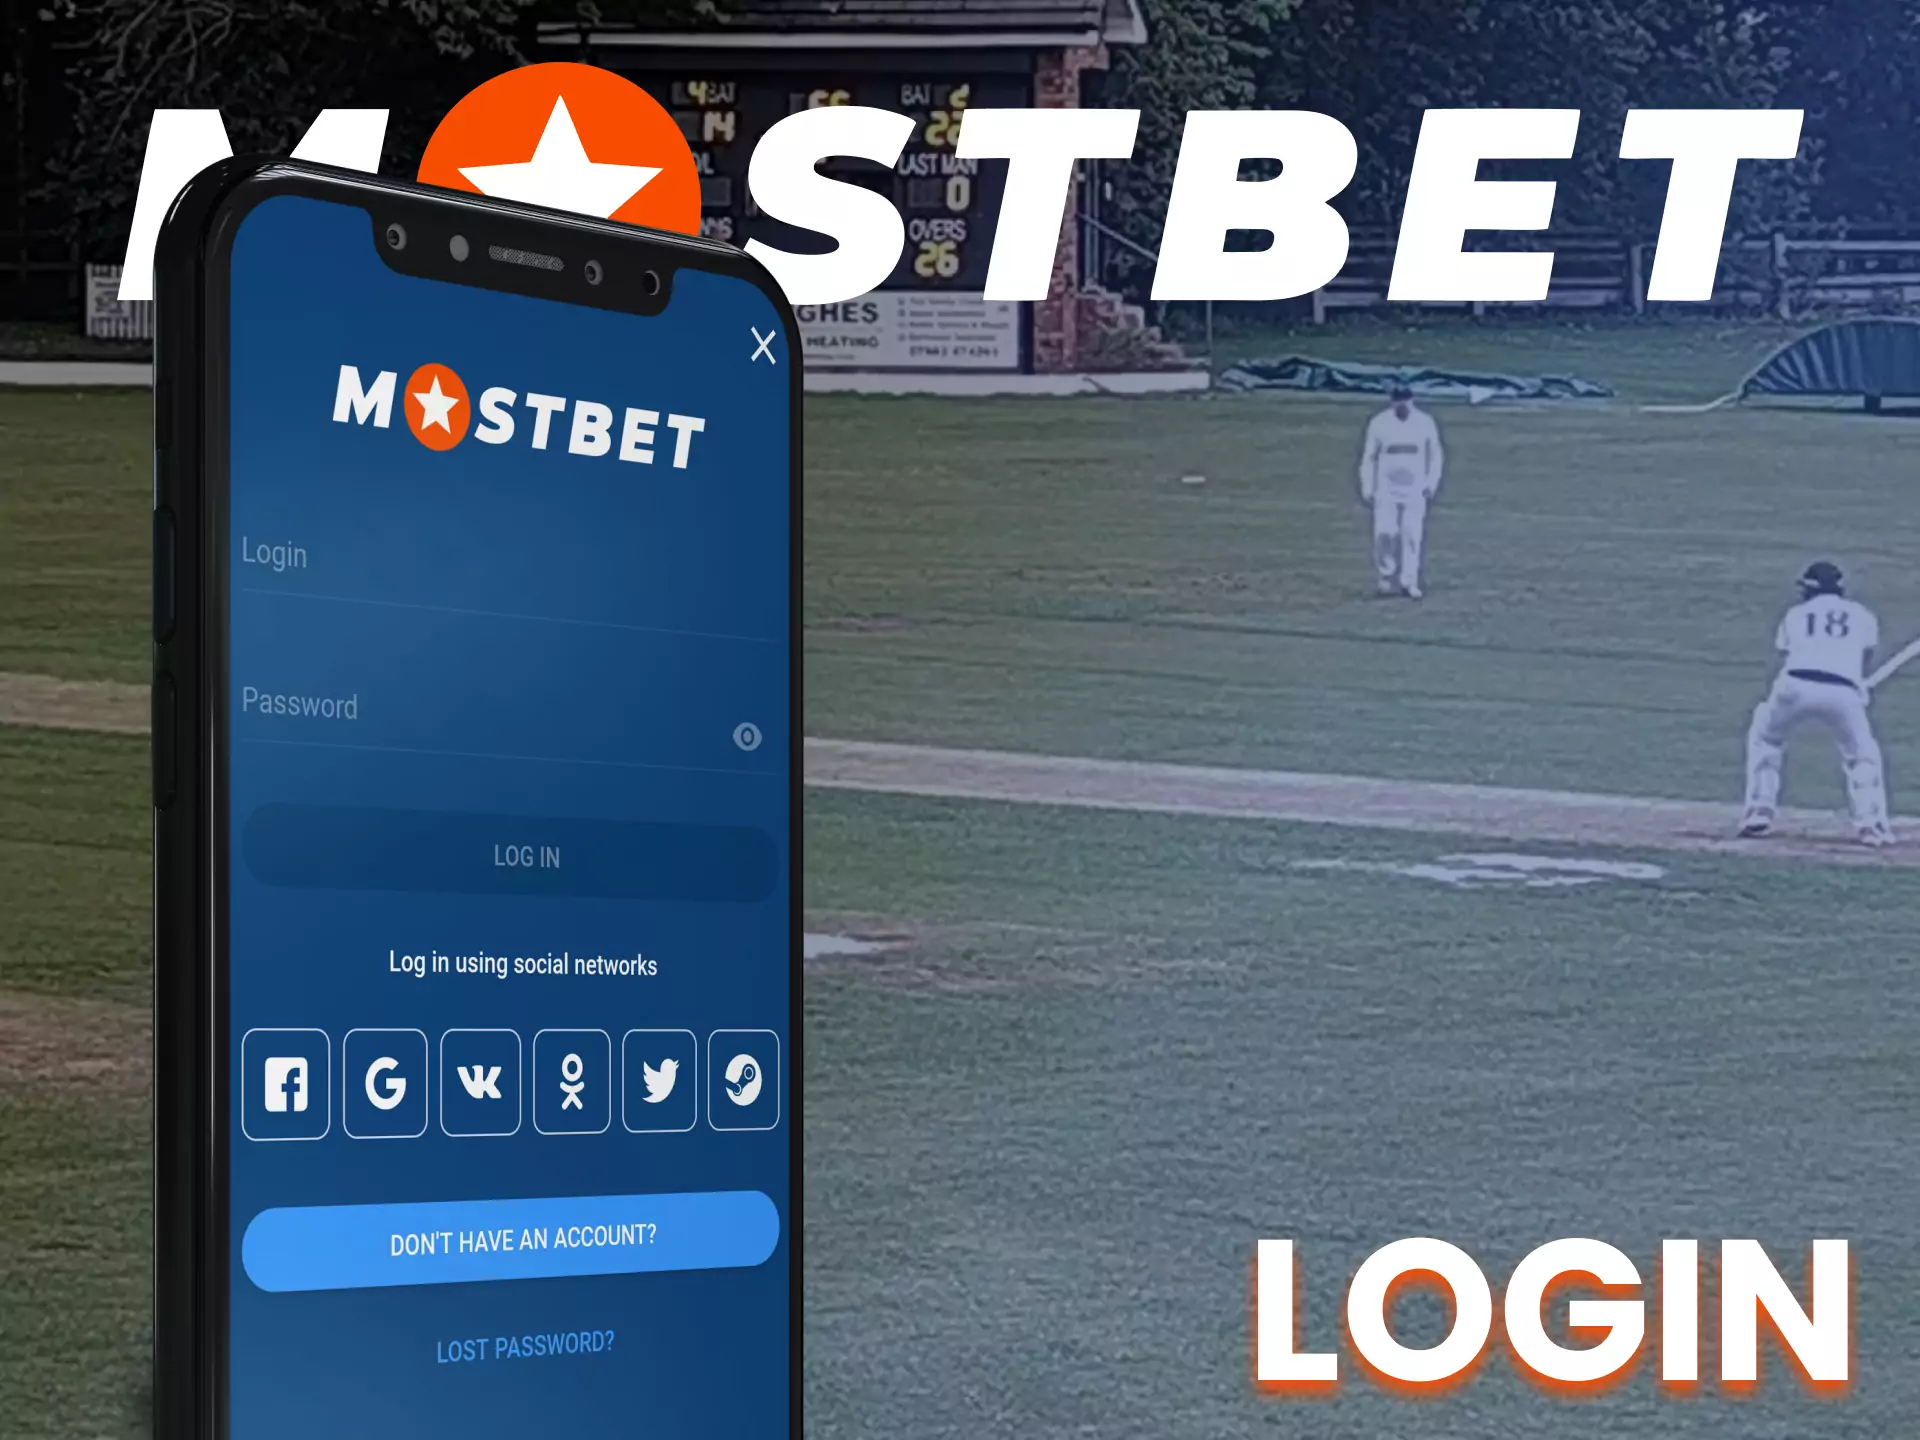 Login to your Mostbet app account to have access to all the features.